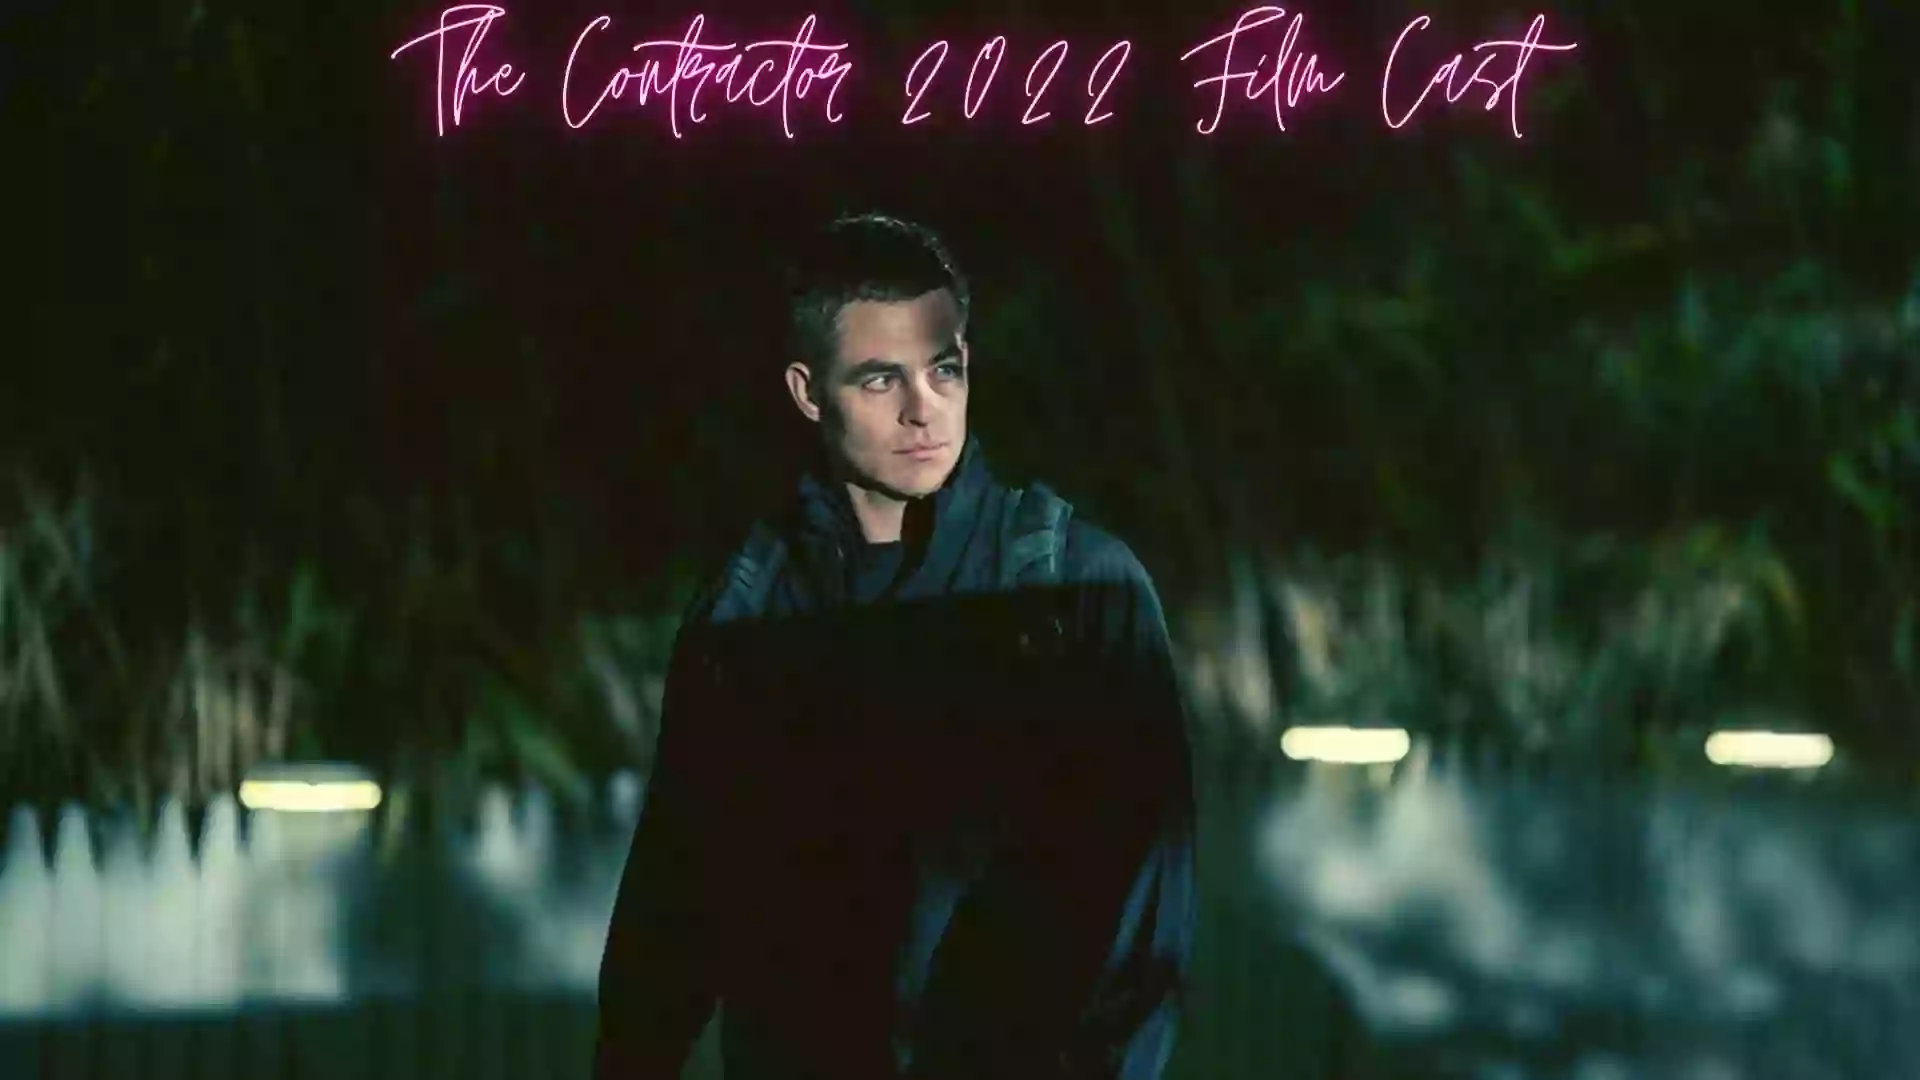 The Contractor Cast | The Contractor 2022 Film Starcast